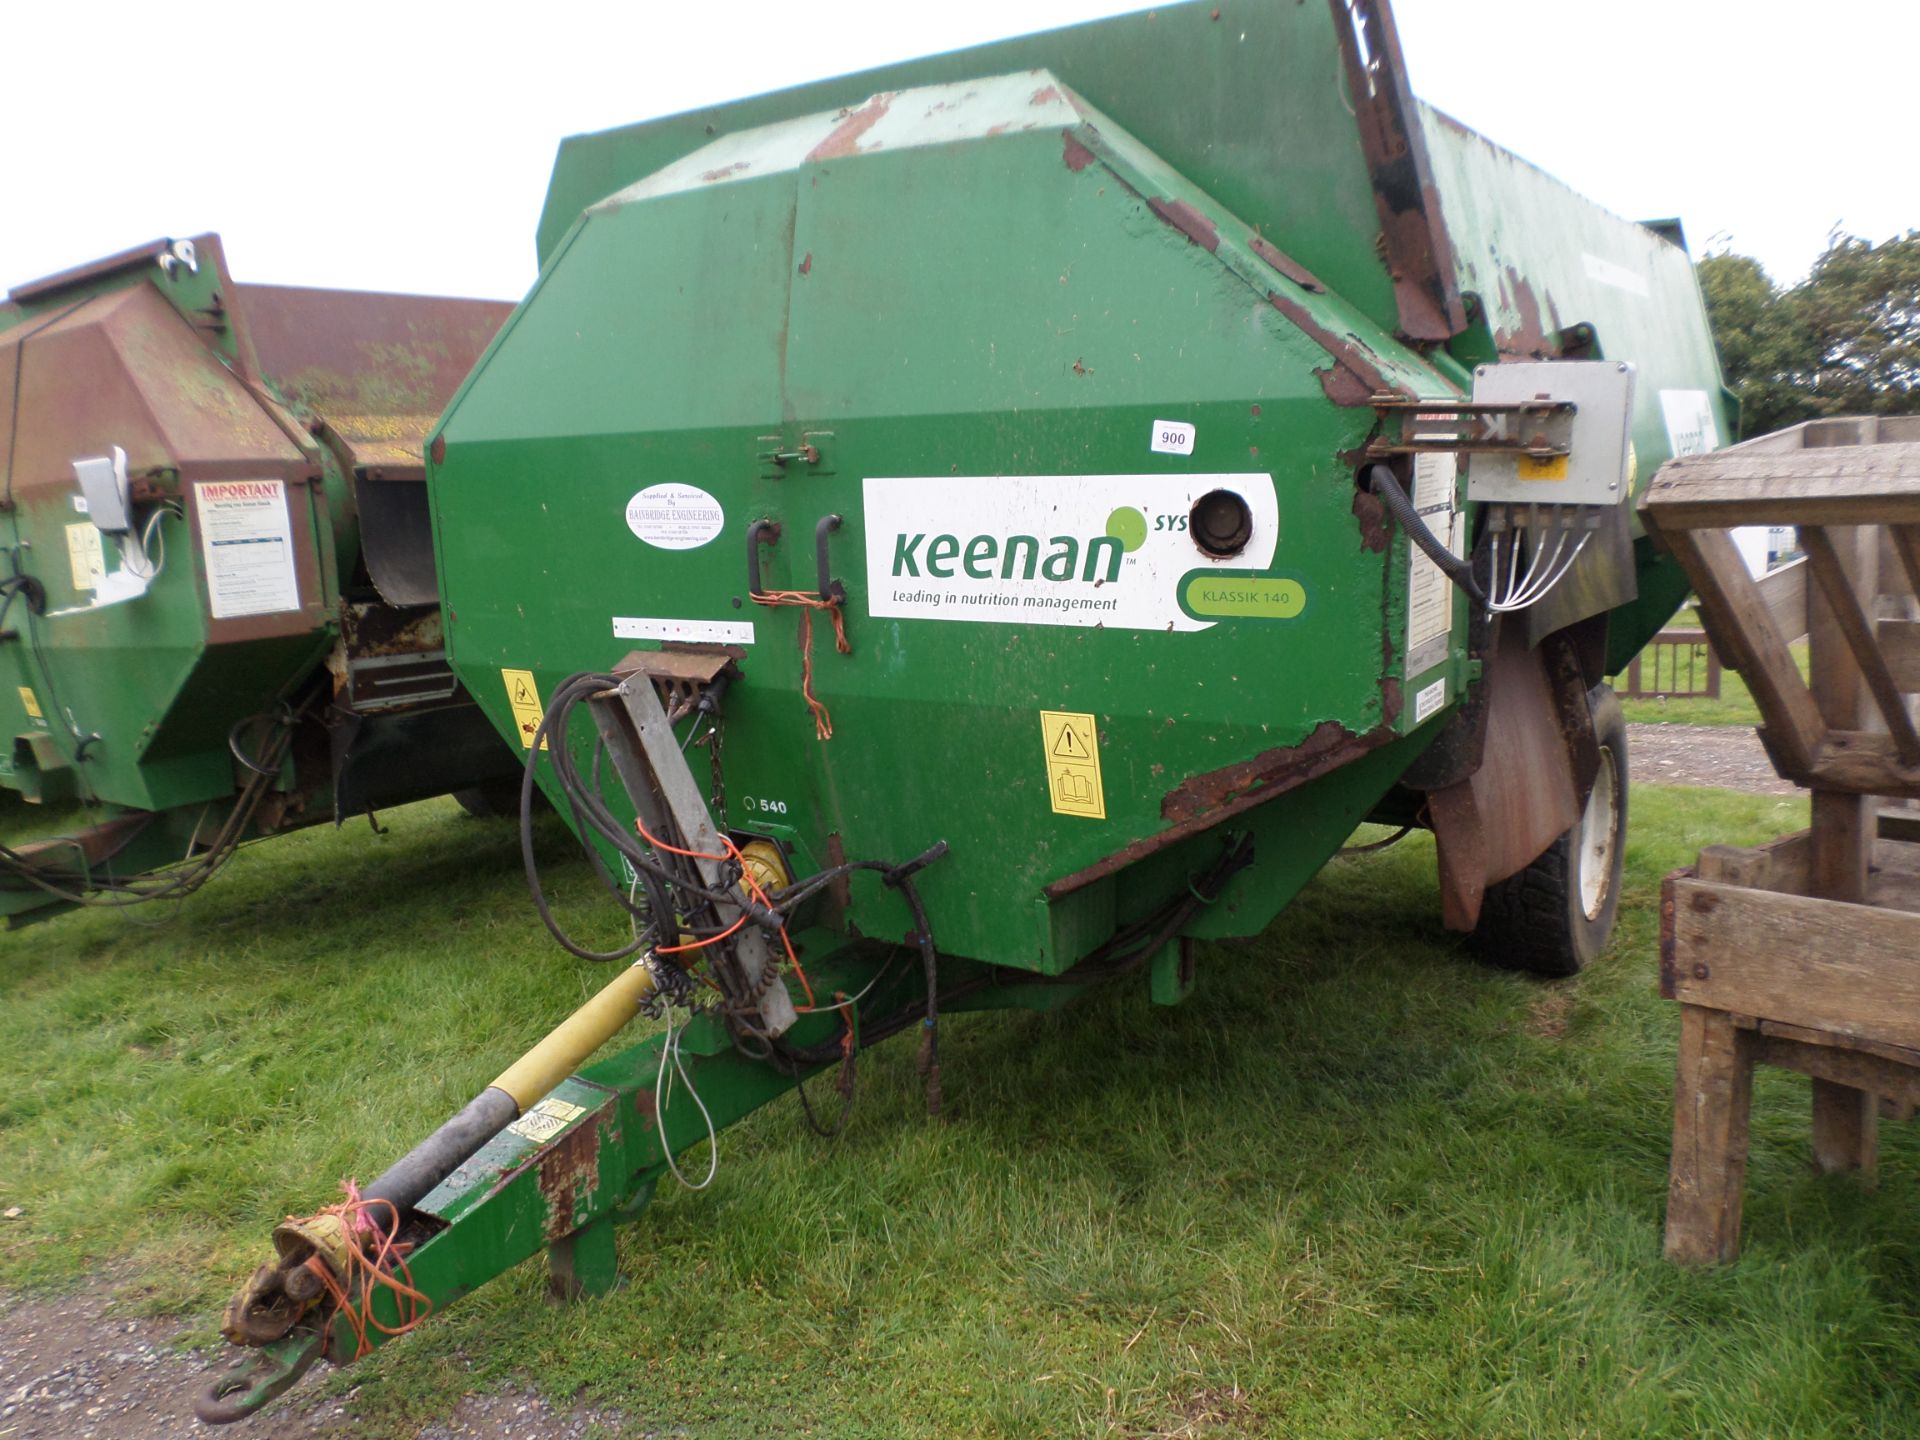 Keenan Klassic 140 feeder wagon, root chopping knives fitted, been backup machine so very little